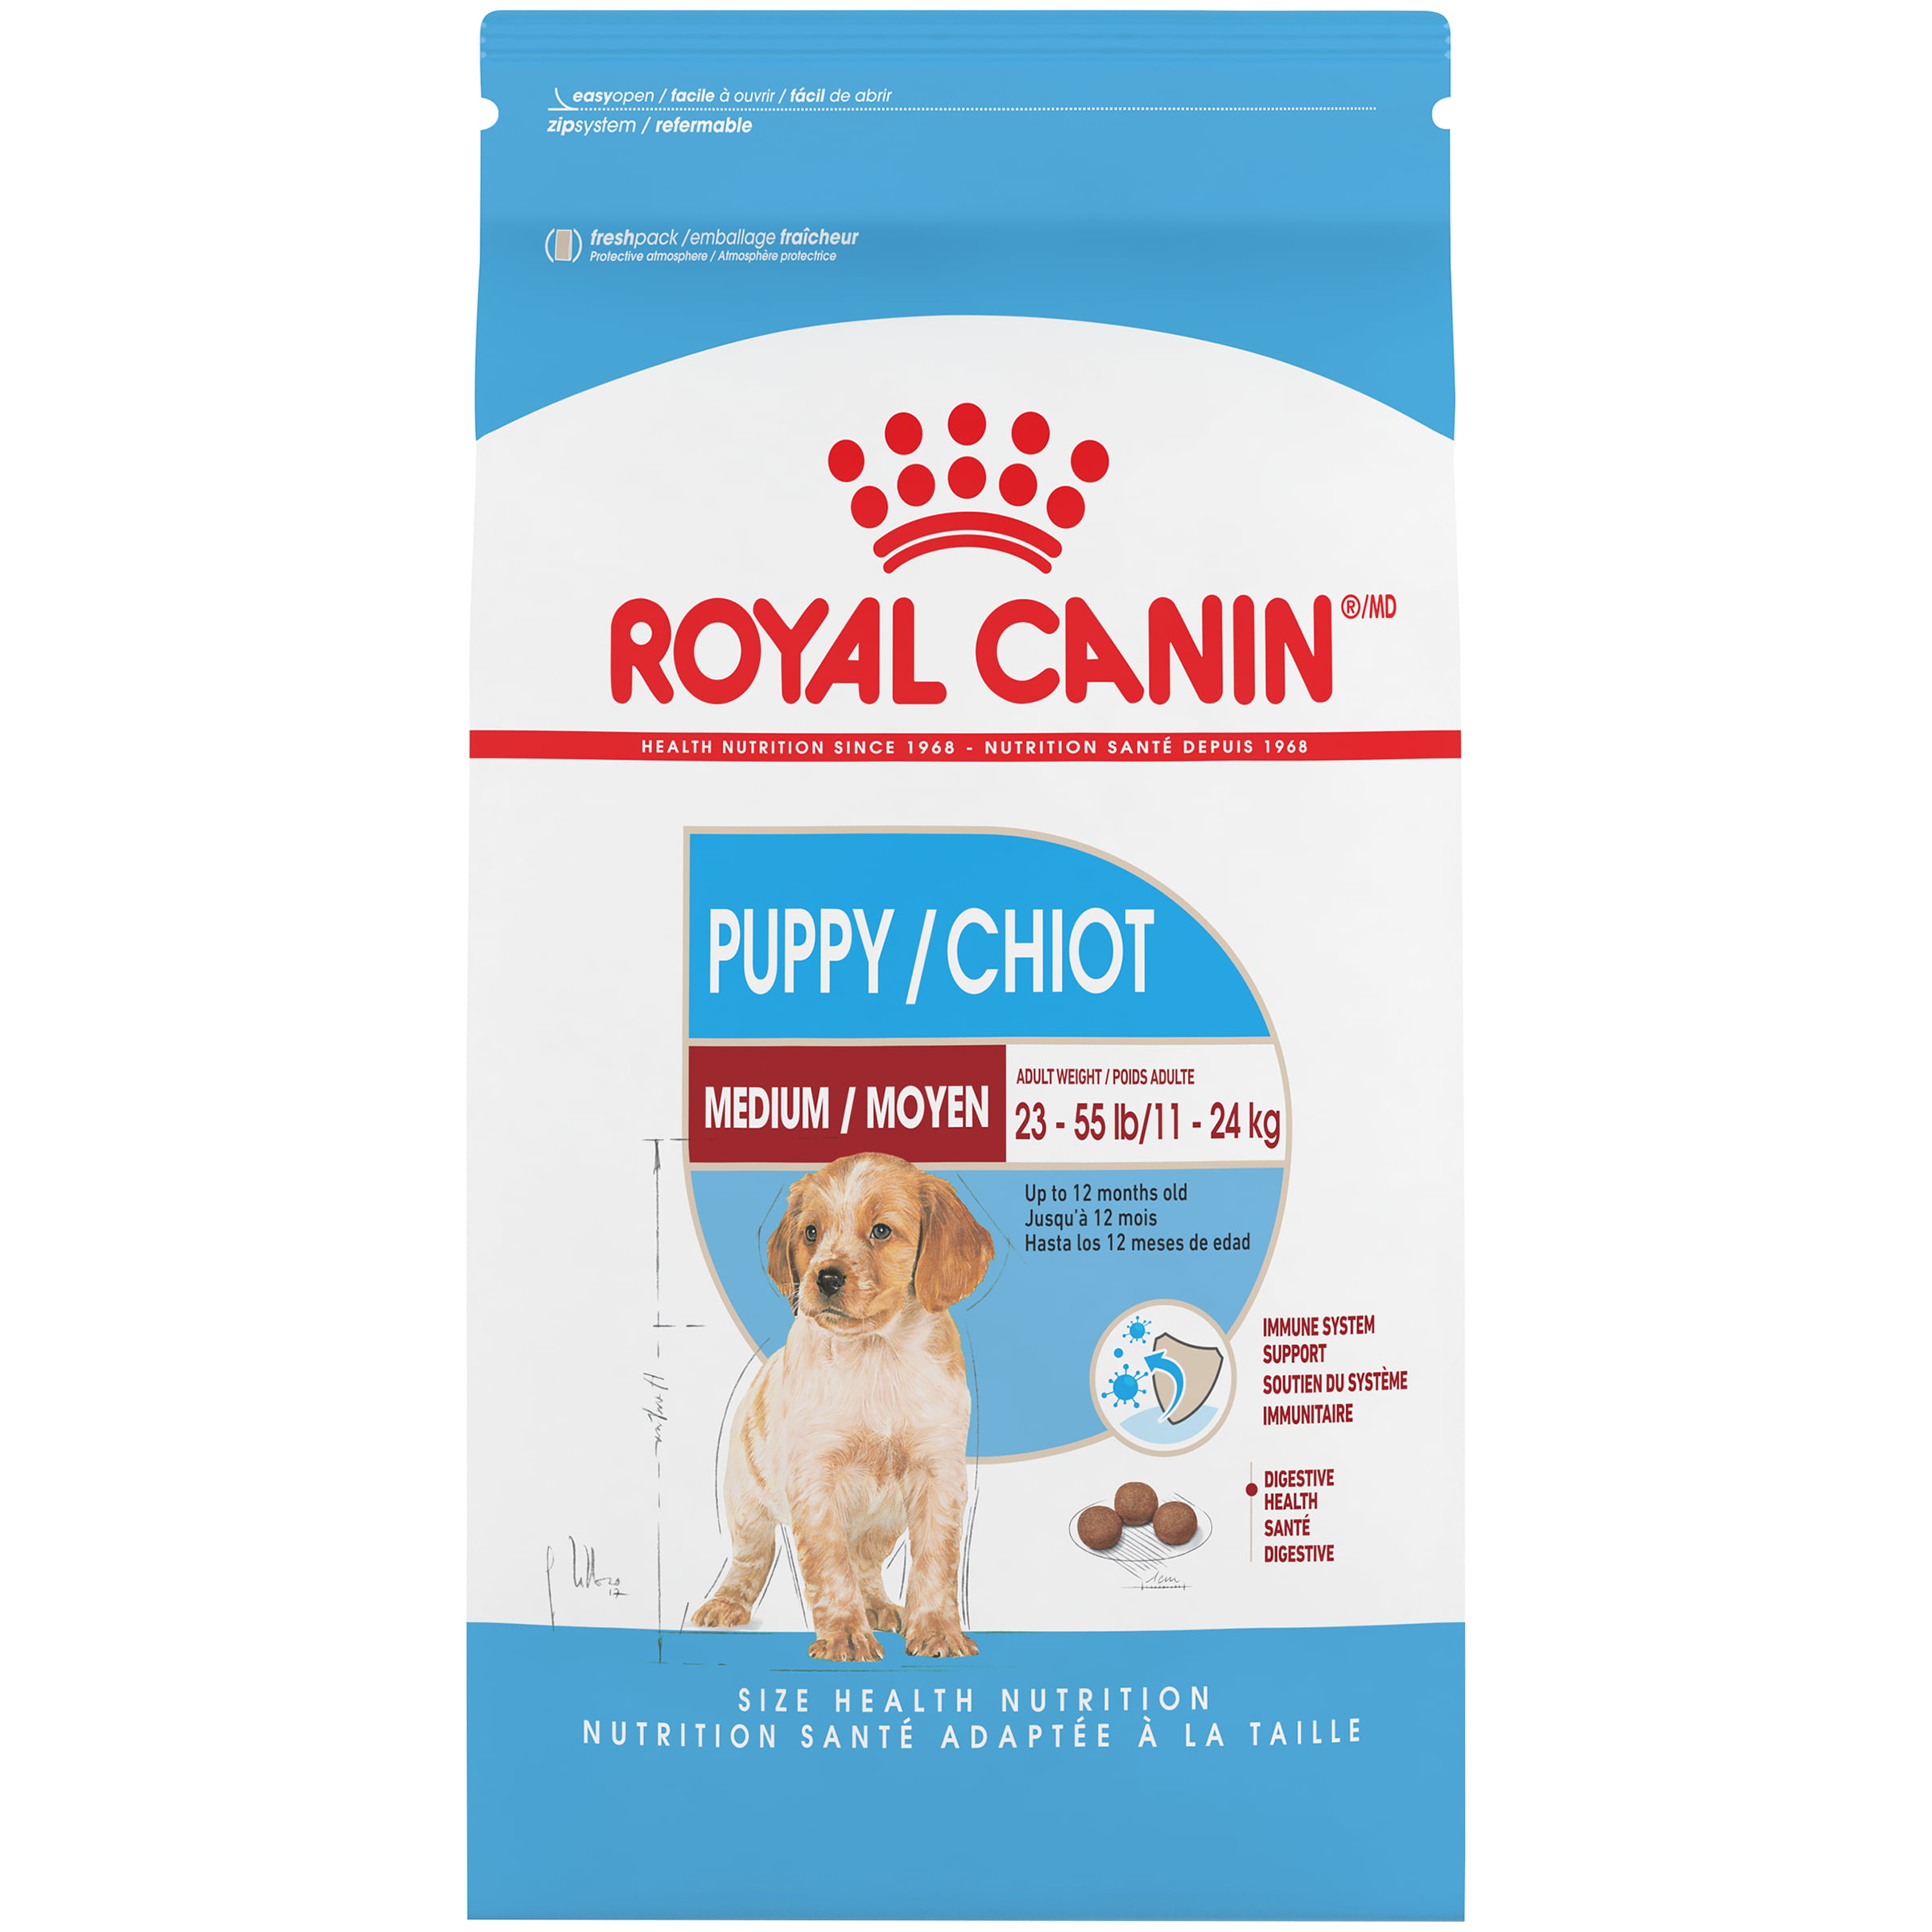 royal canin cost